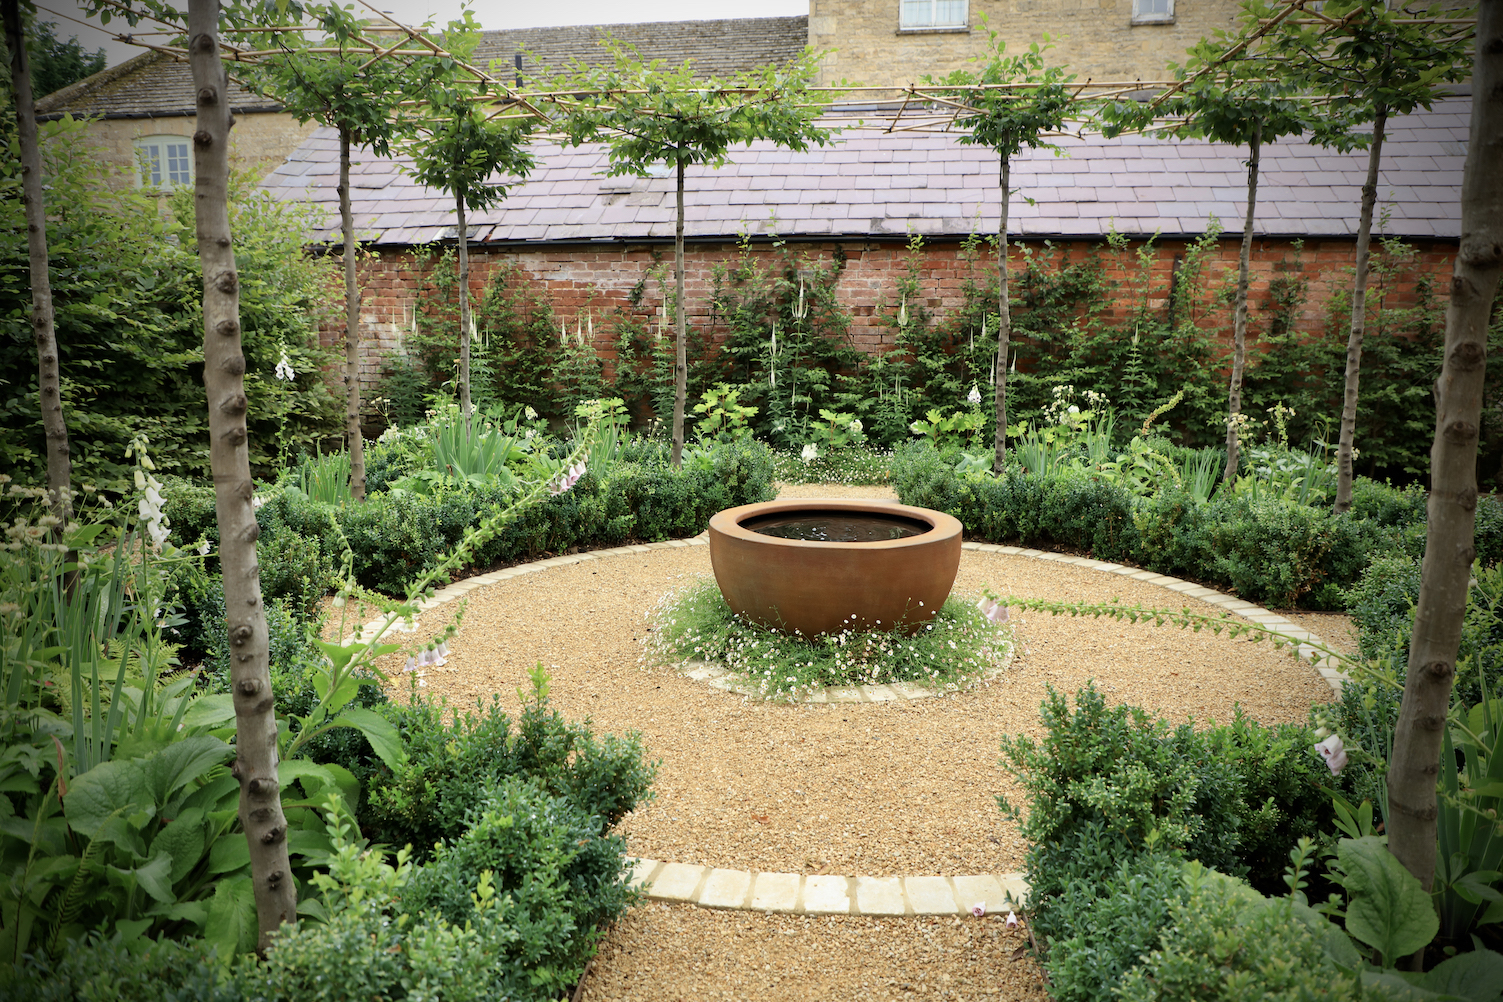 View of water feature in the centre of a parterre garden in circular shape